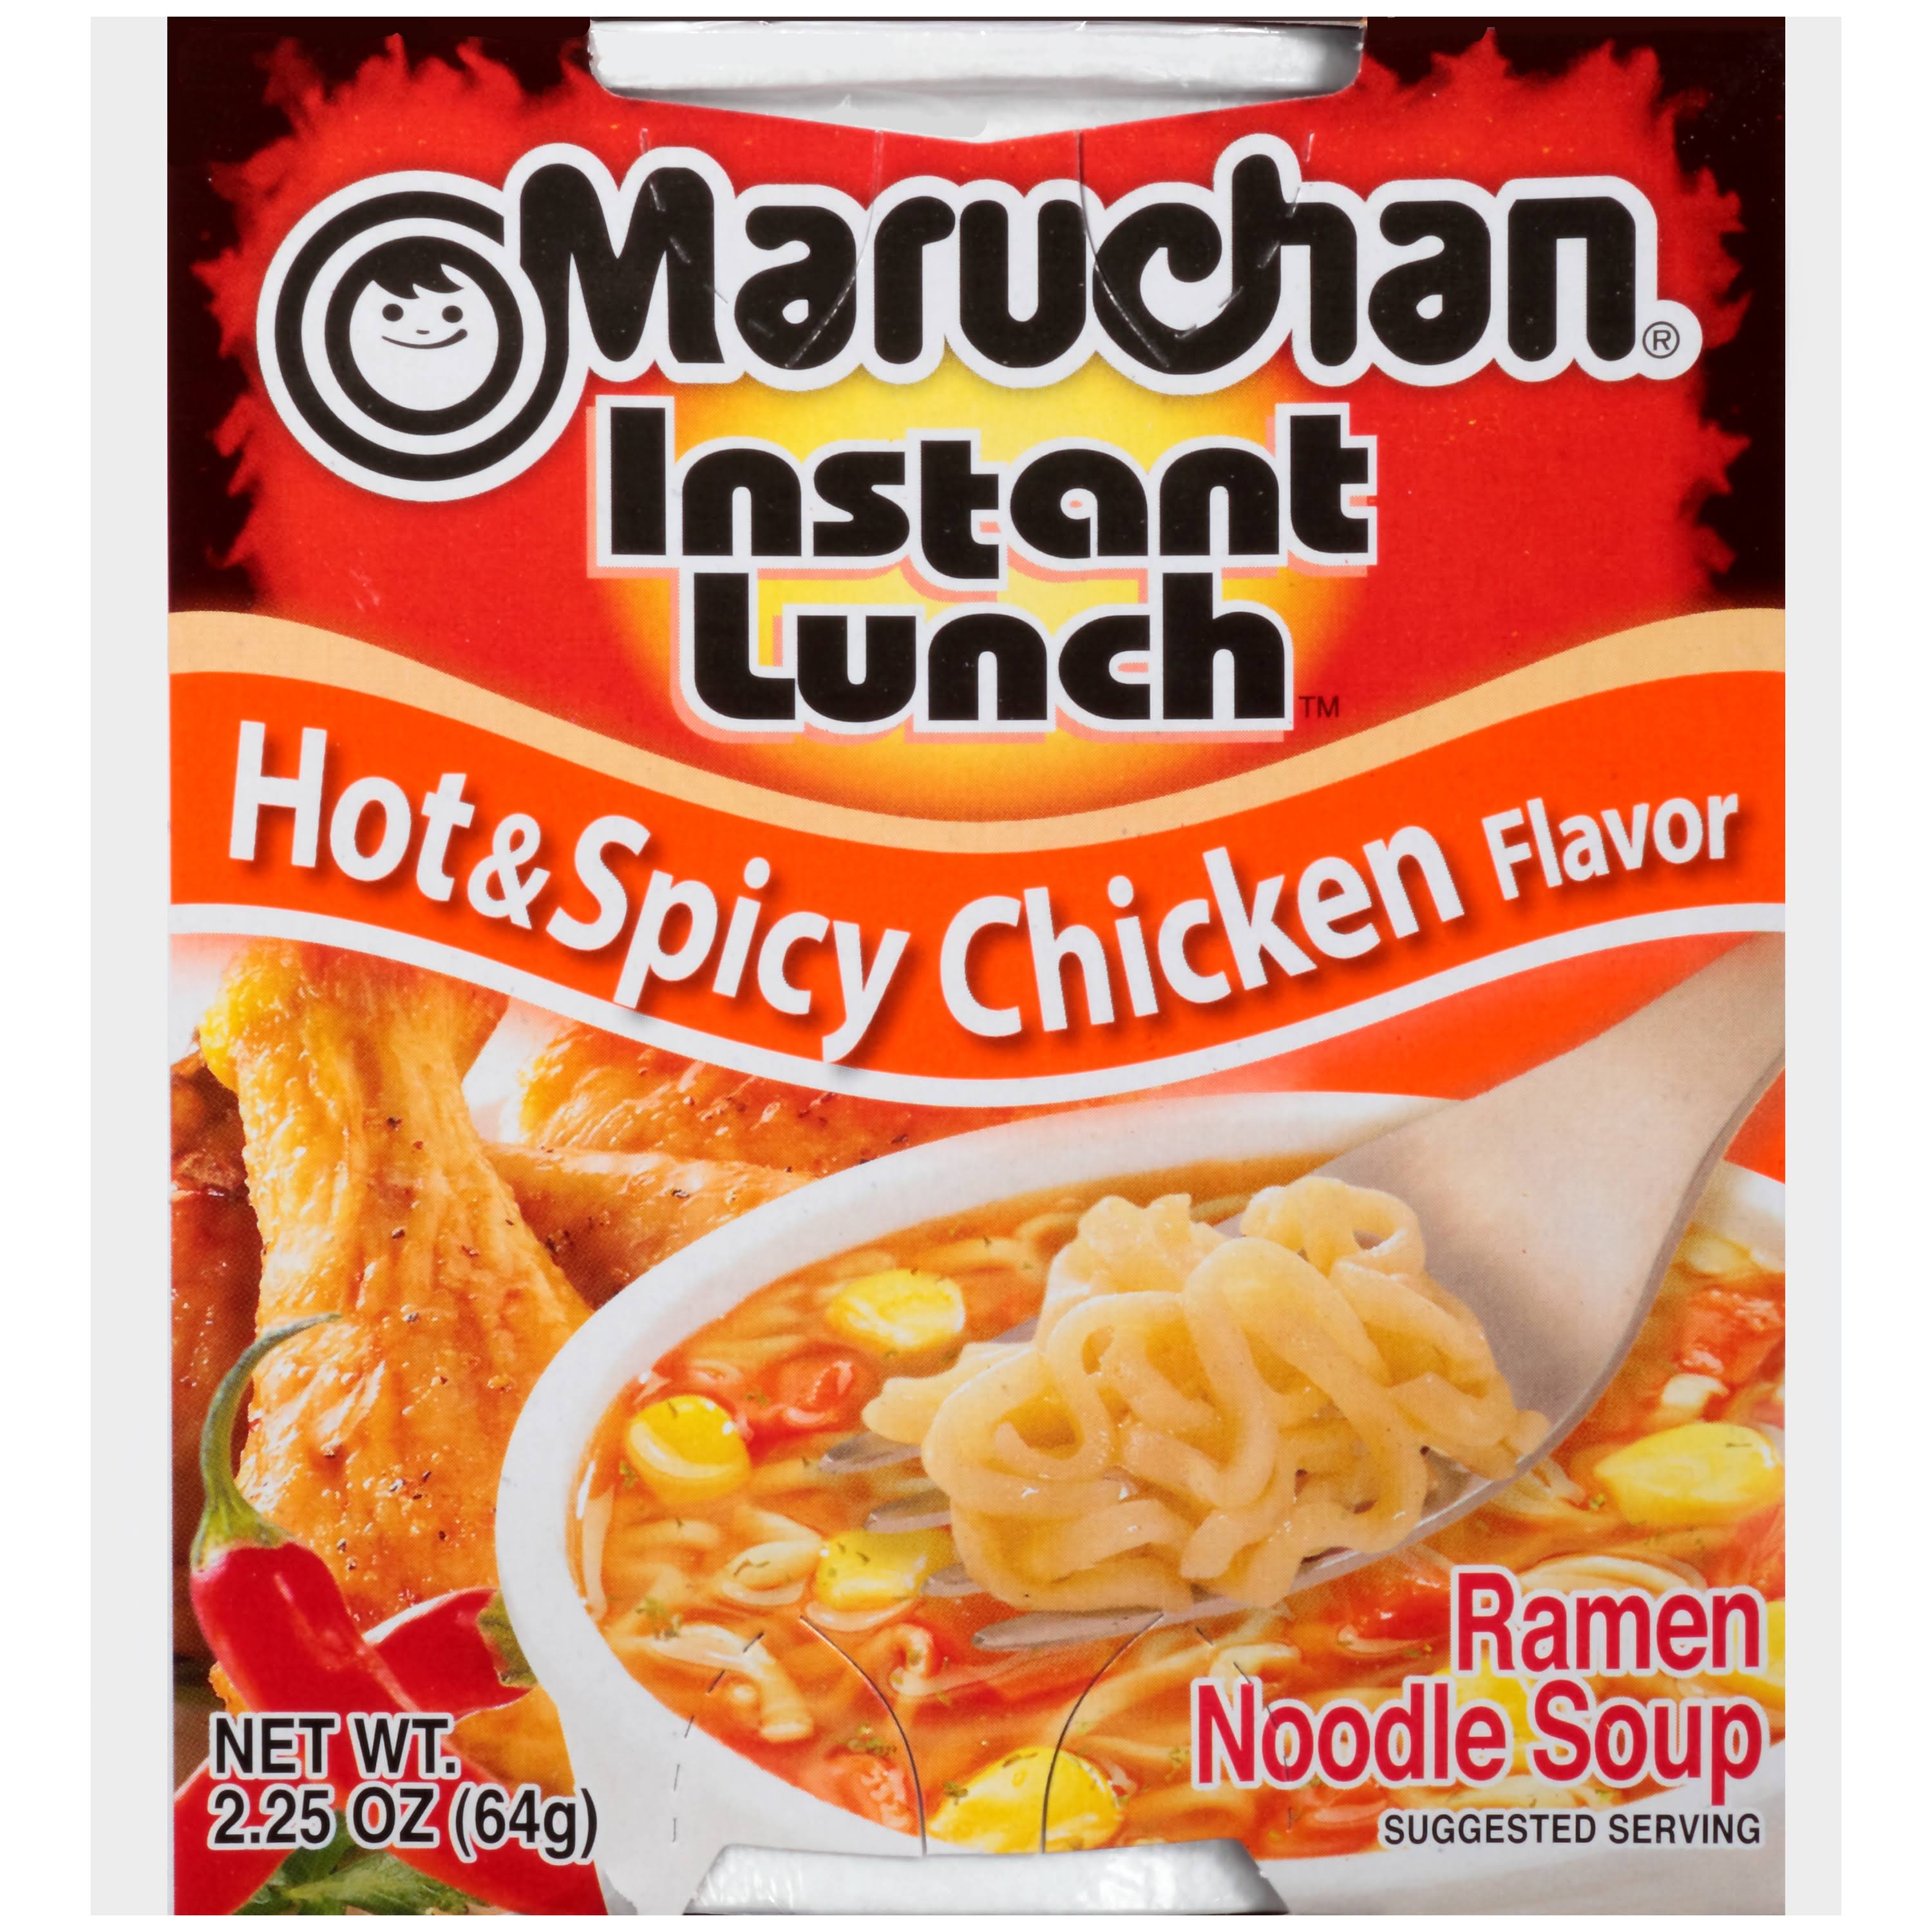 Maruchan Instant Lunch Ramen Noodle Soup - 2.25oz, Hot and Spicy Chicken Flavor